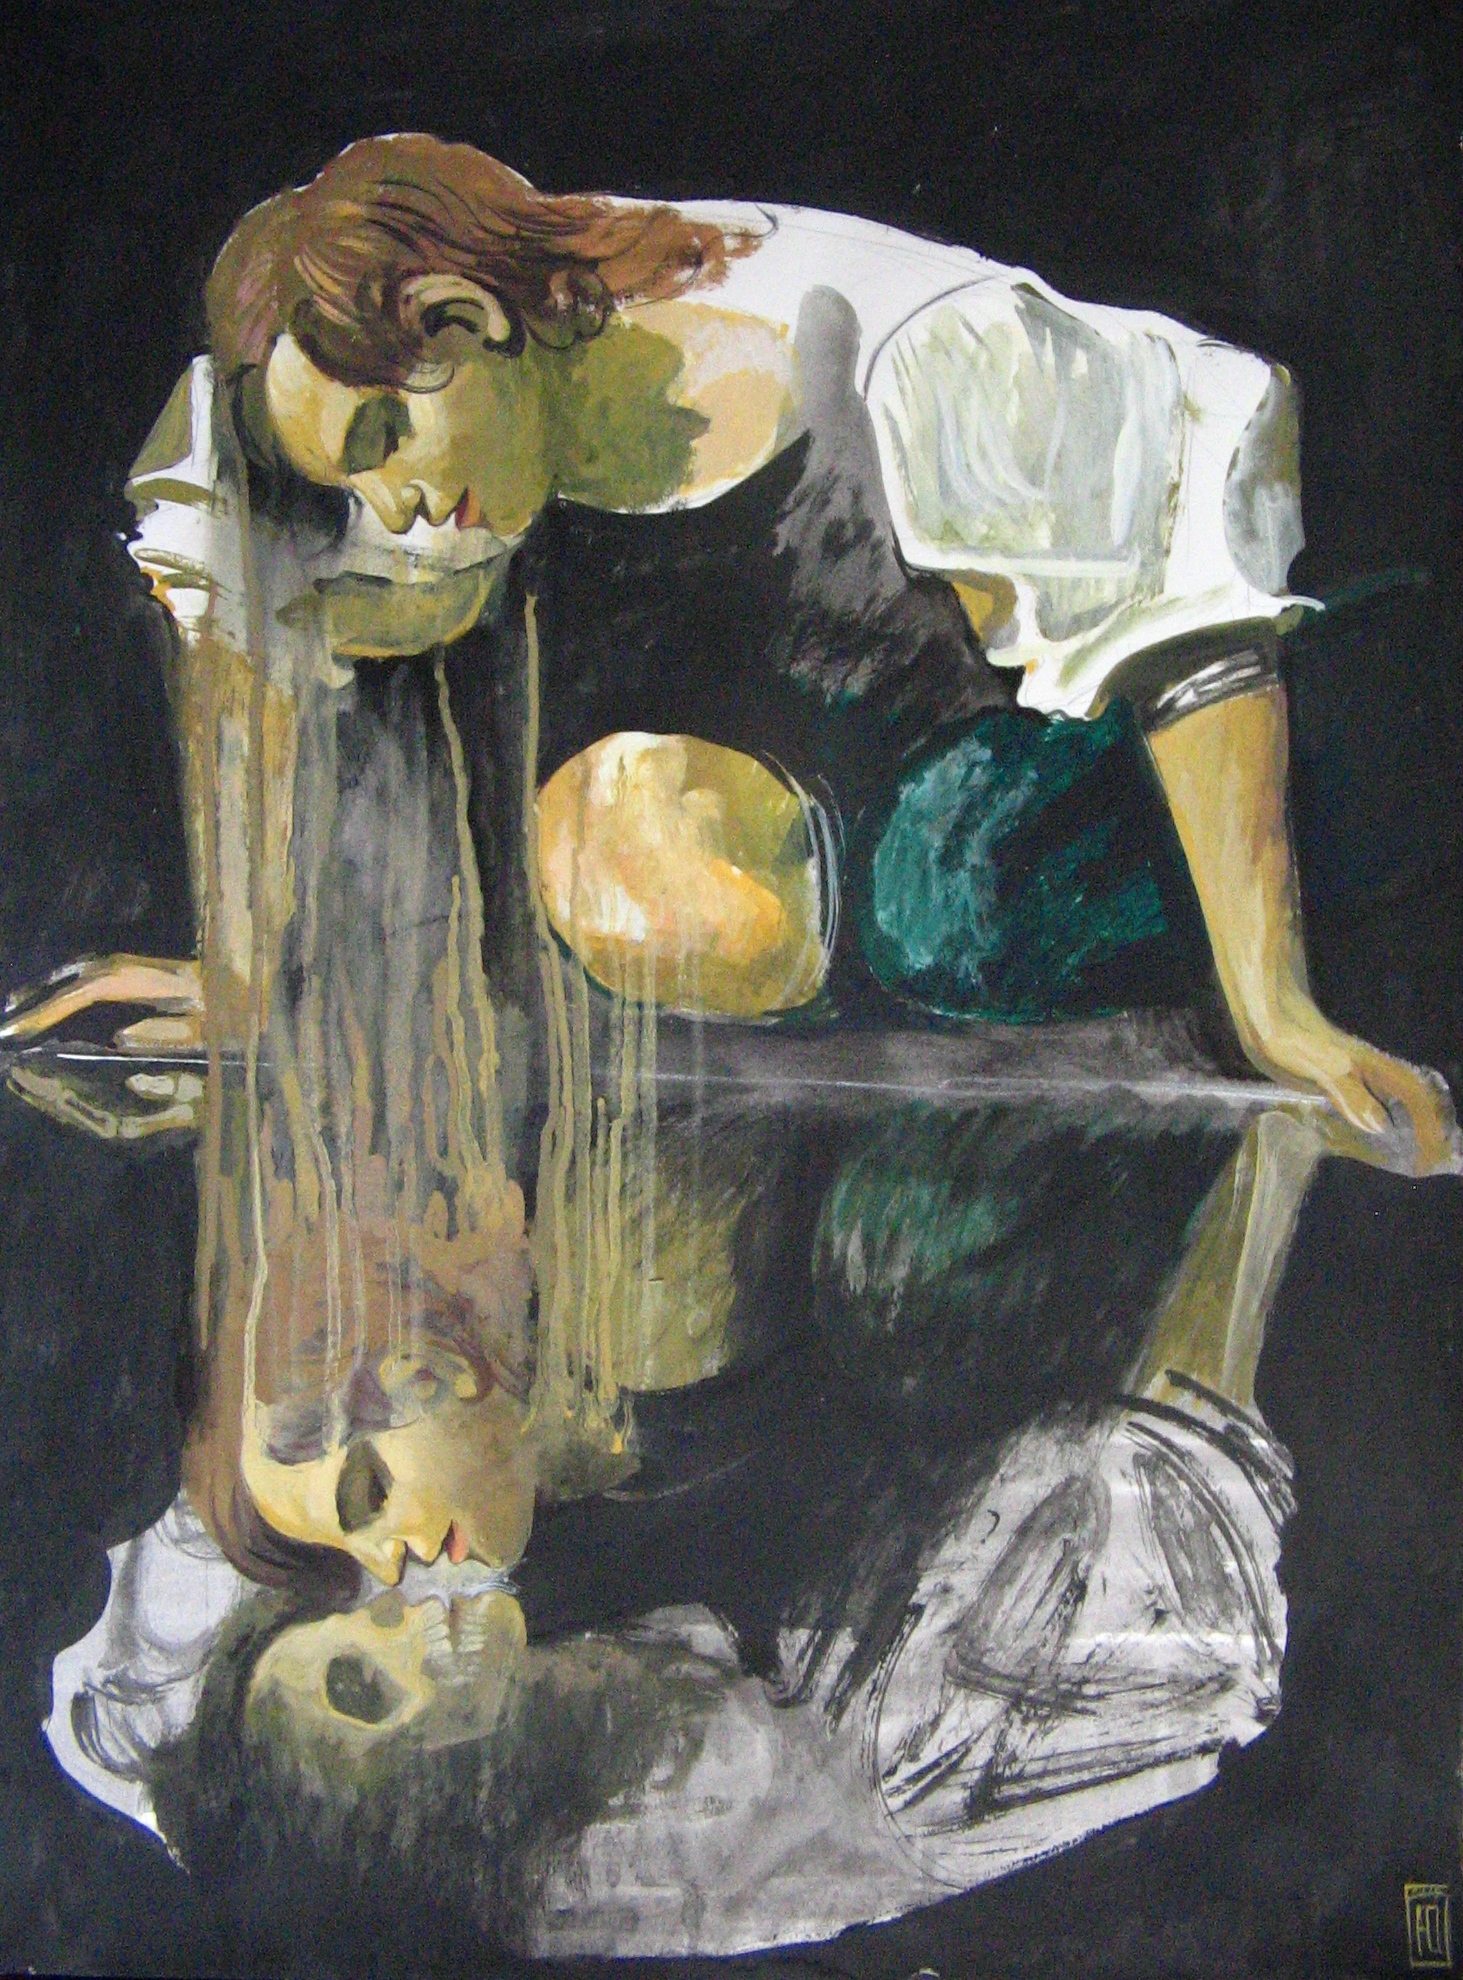 Narcissus Tempera Painting By Julia Bezshtanko  absolutearts.com